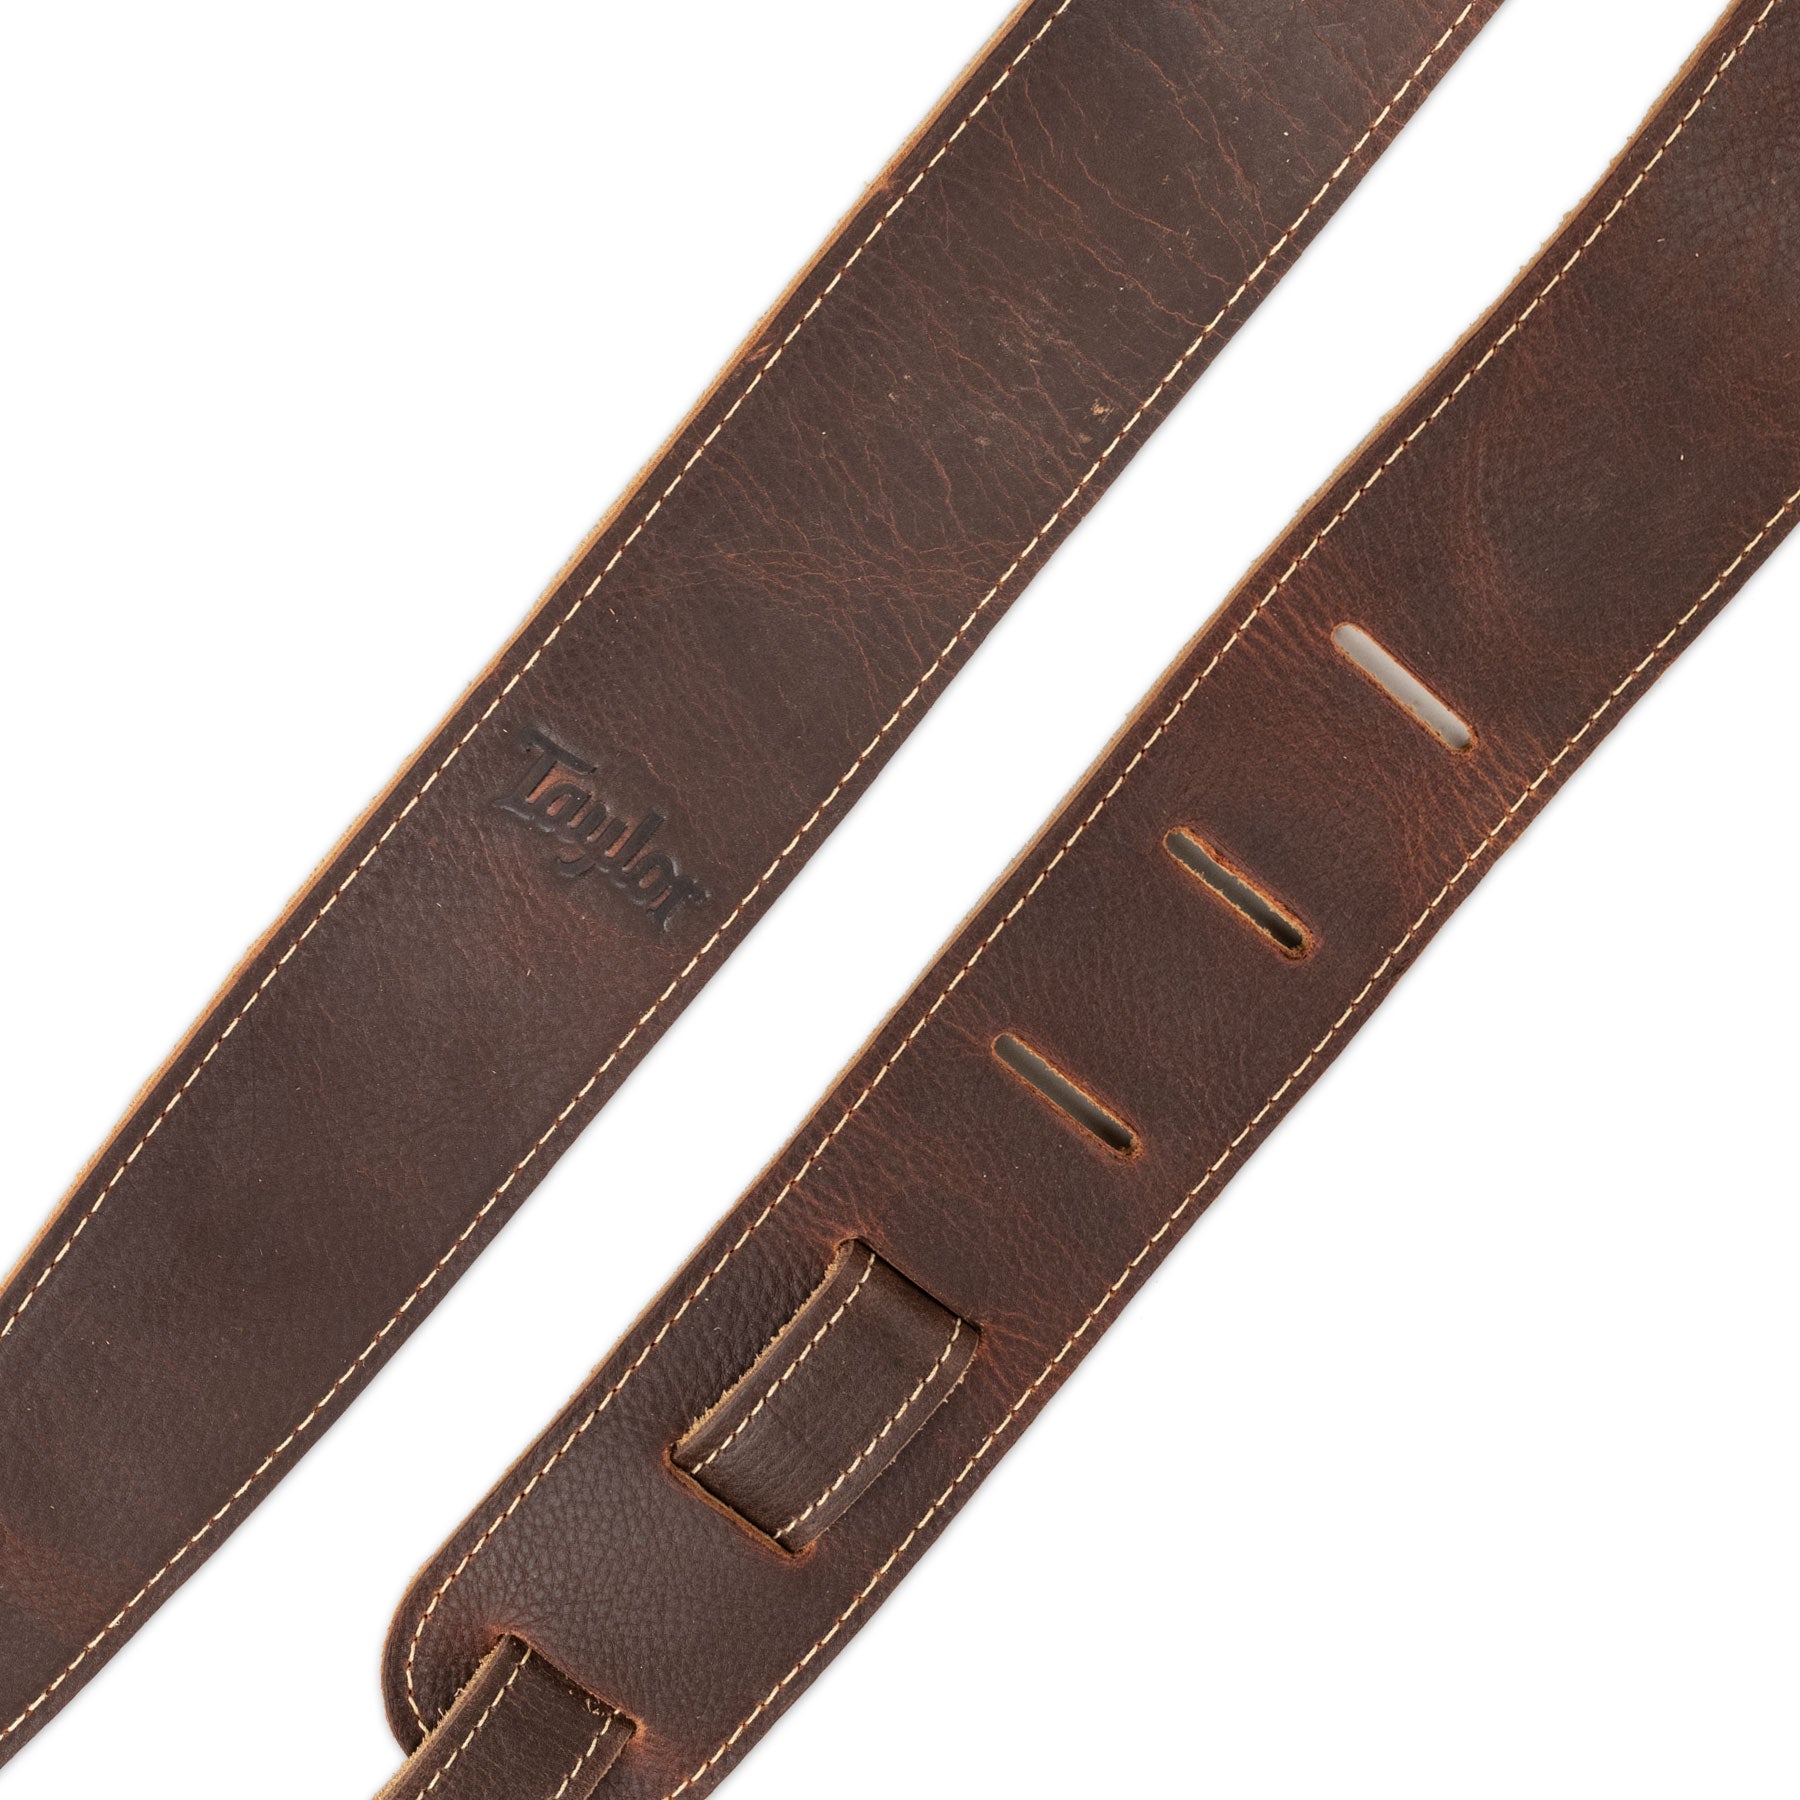 TAYLOR 4101-25 2.5” BROWN LEATHER/SUEDE BACK GUITAR STRAP